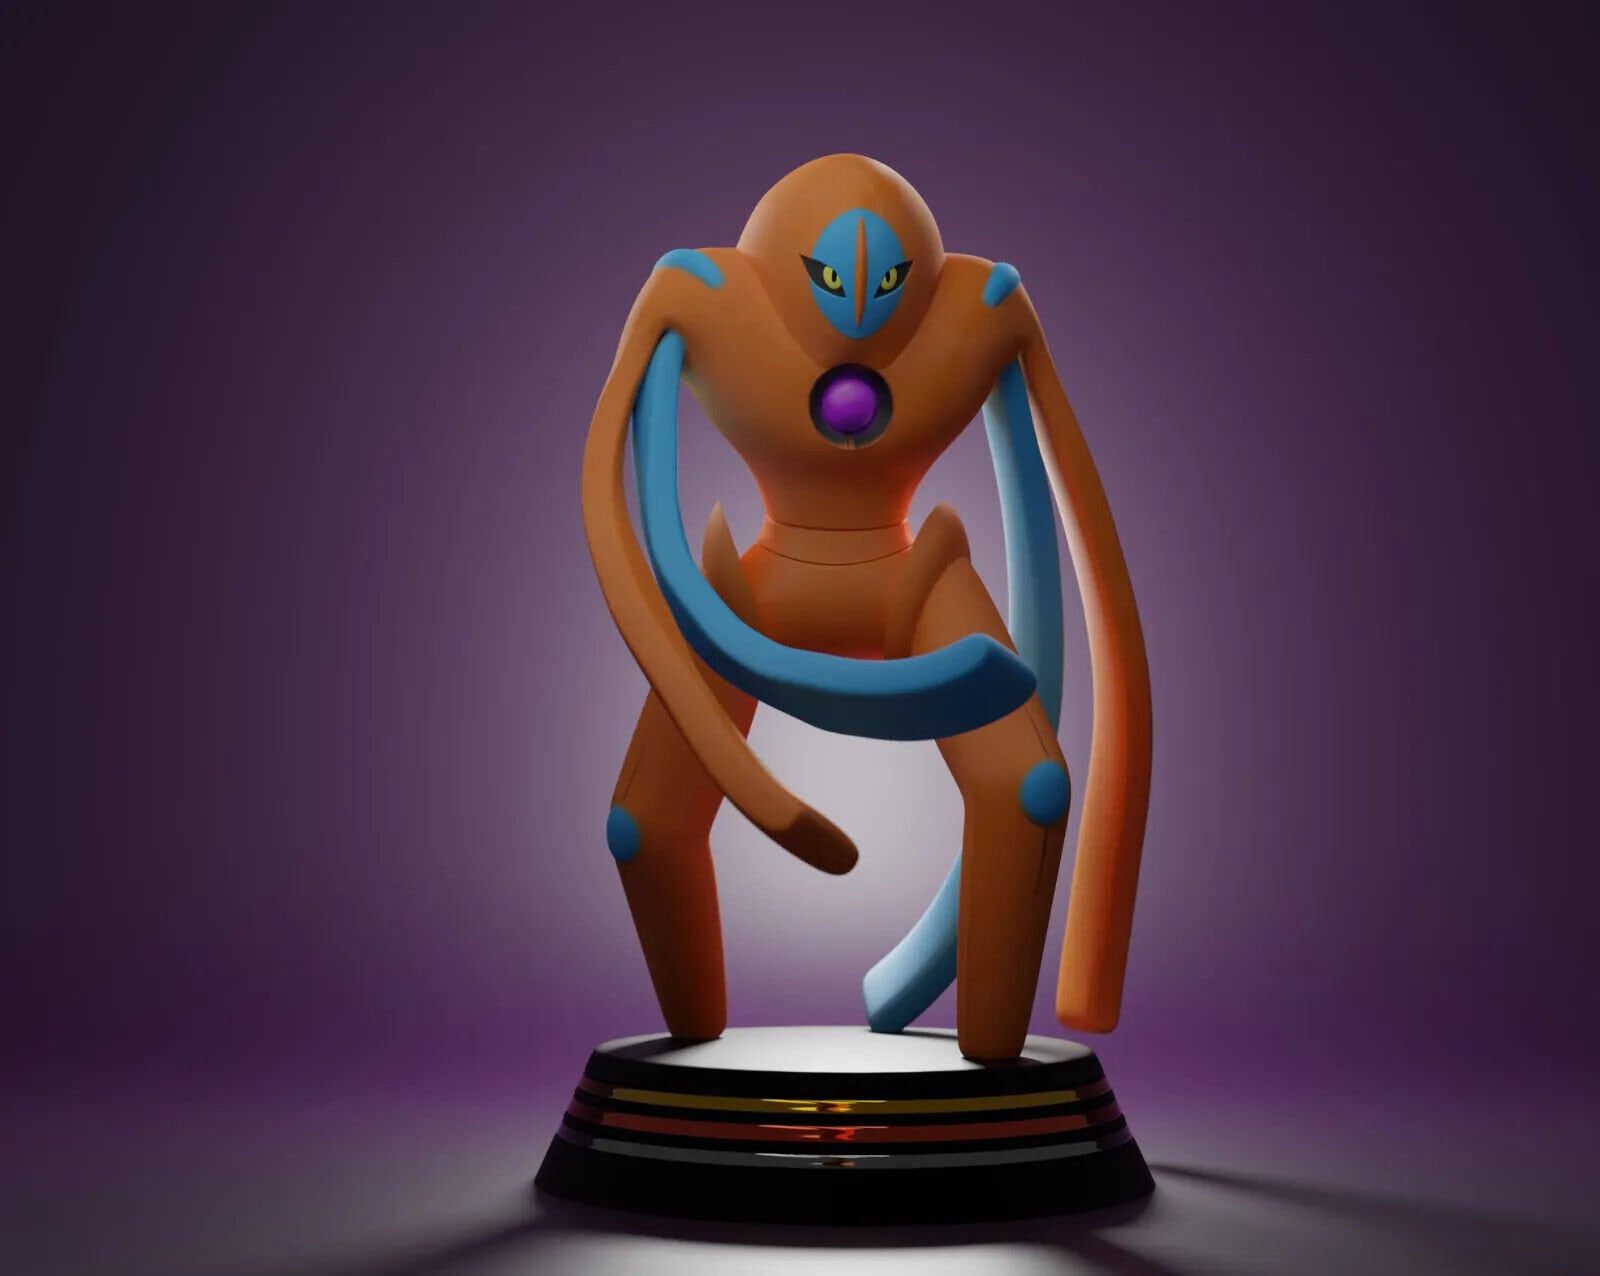 I edited Deoxys' shiny forms to look more aesthetically pleasing. Thoughts?  : r/pokemon